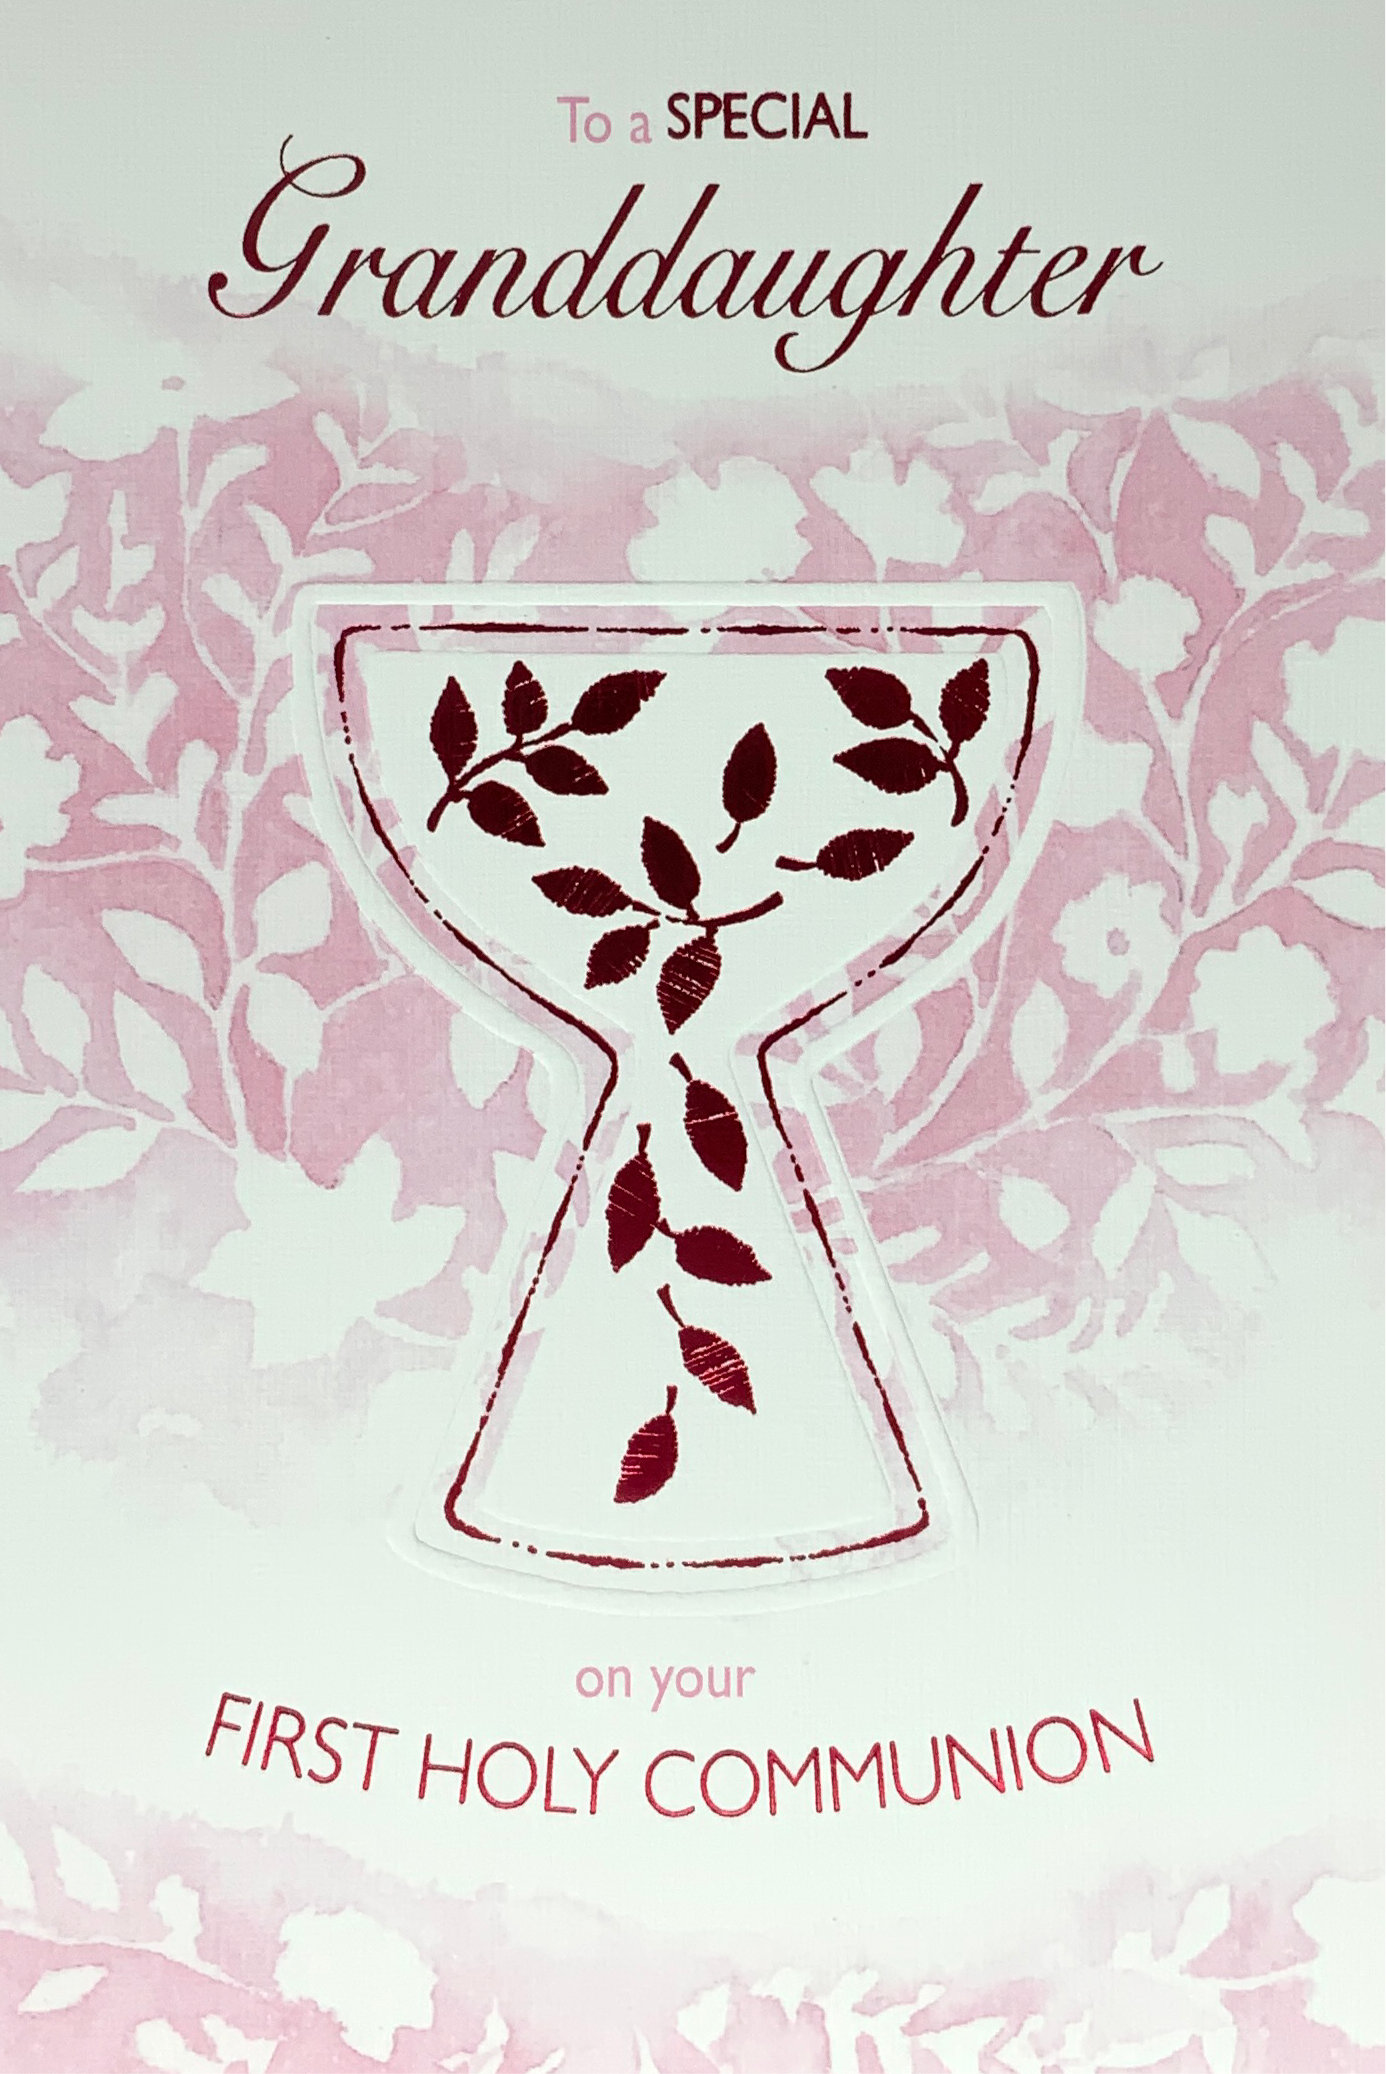 Communion Card - To A Wonderful Granddaughter